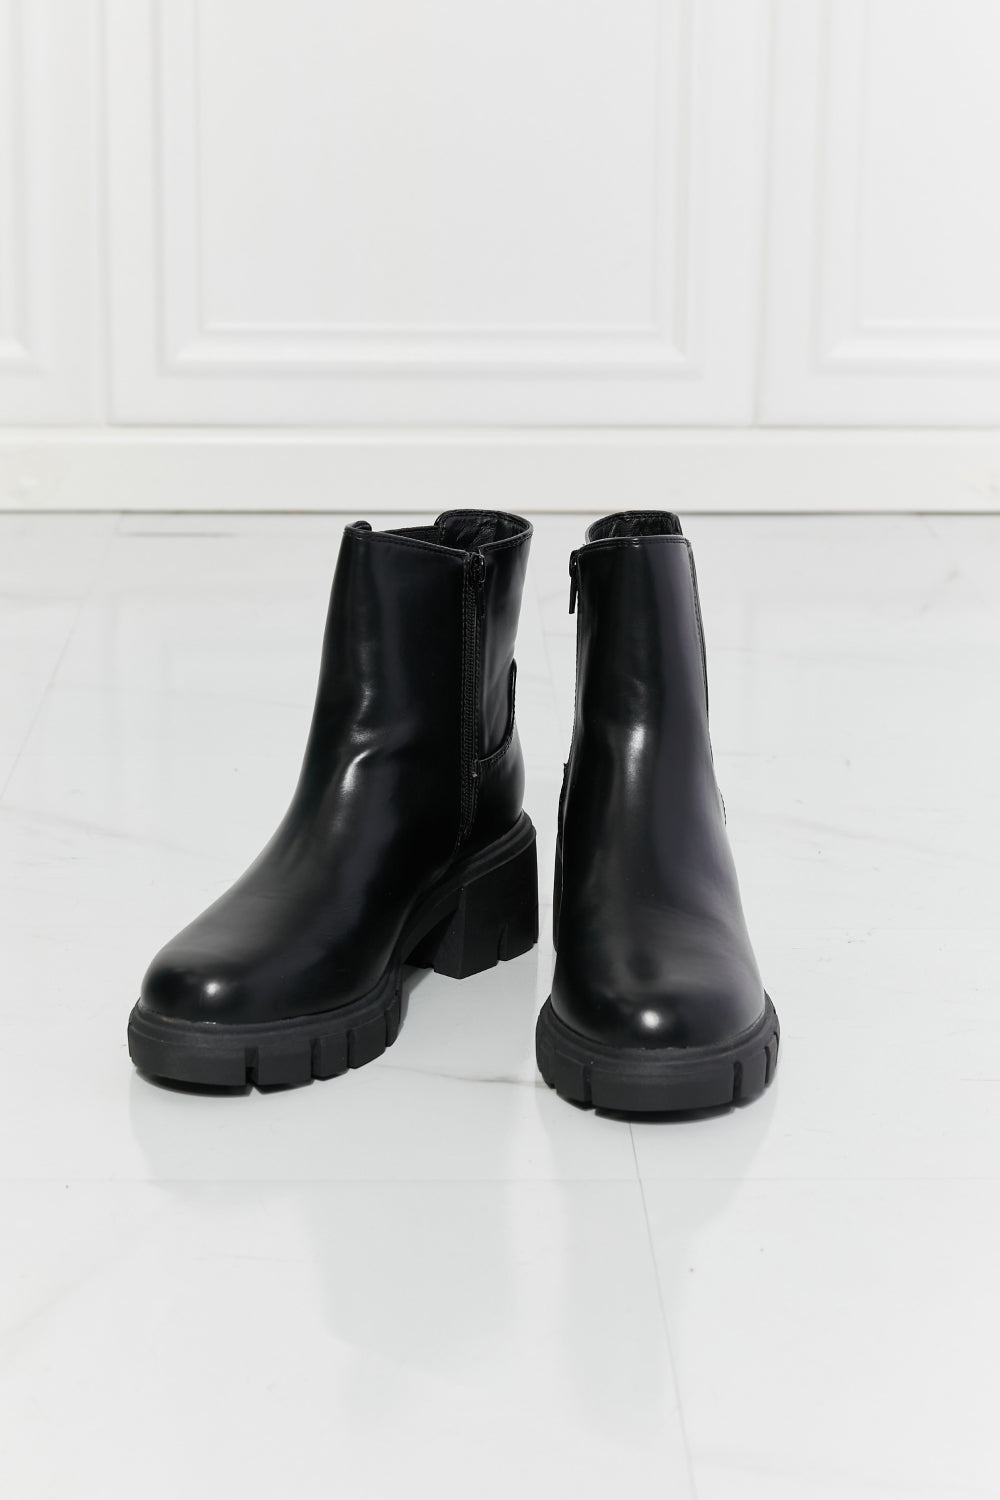 MMShoes What It Takes Lug Sole Chelsea Boots in Black - Cheeky Chic Boutique